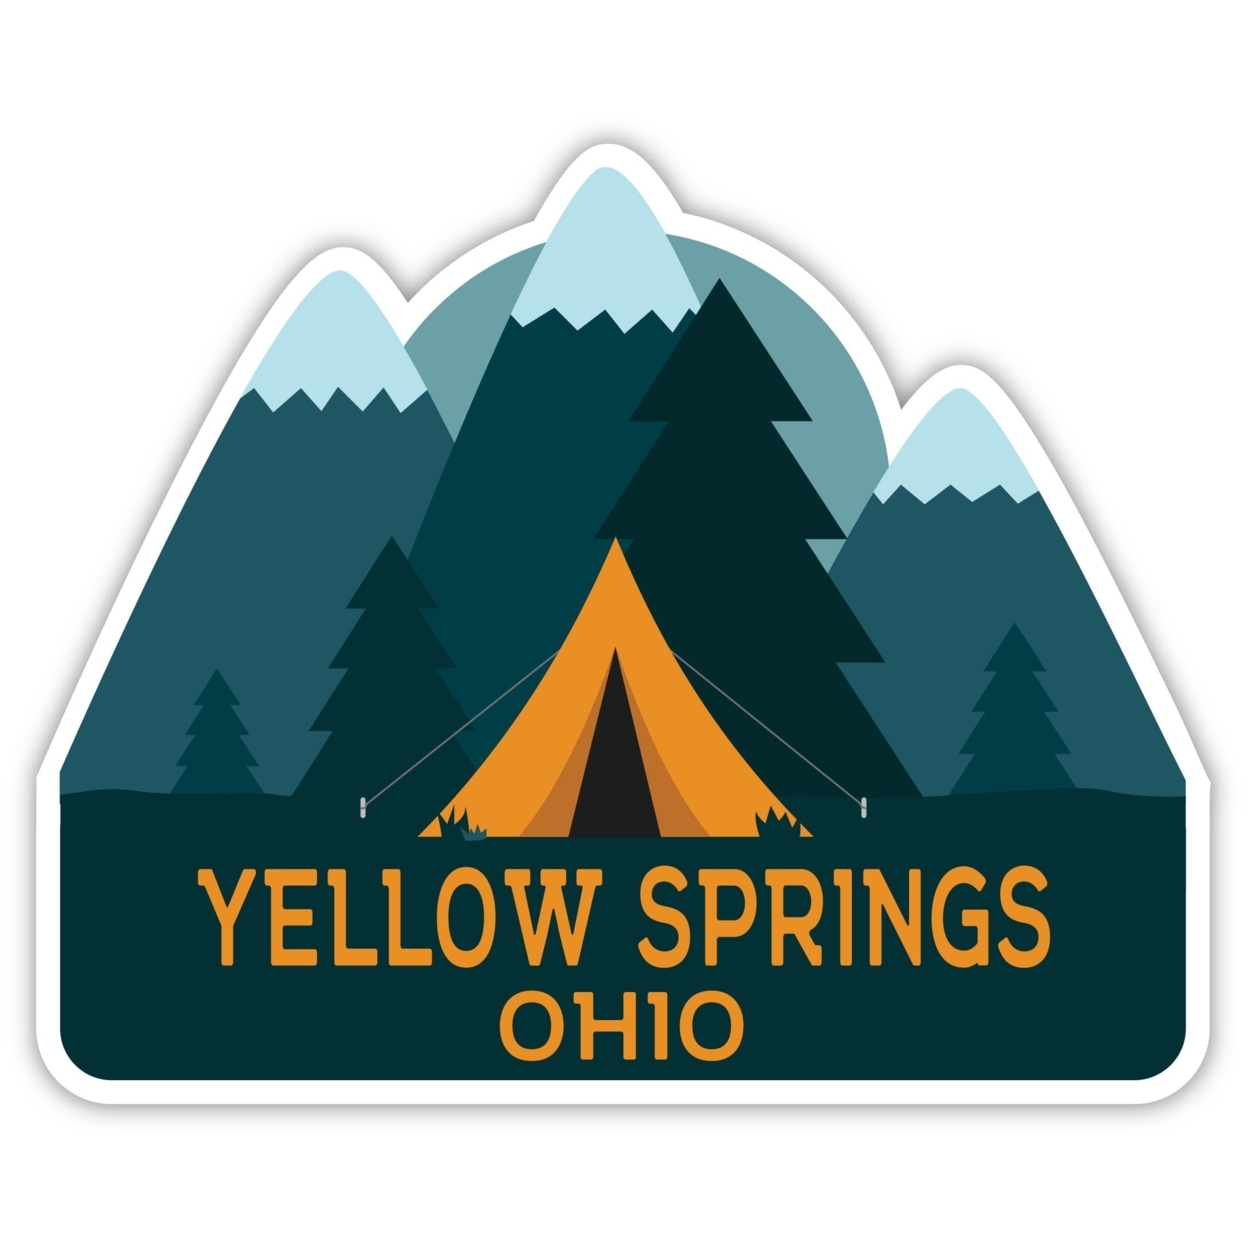 Yellow Springs Ohio Souvenir Decorative Stickers (Choose Theme And Size) - Single Unit, 4-Inch, Camp Life